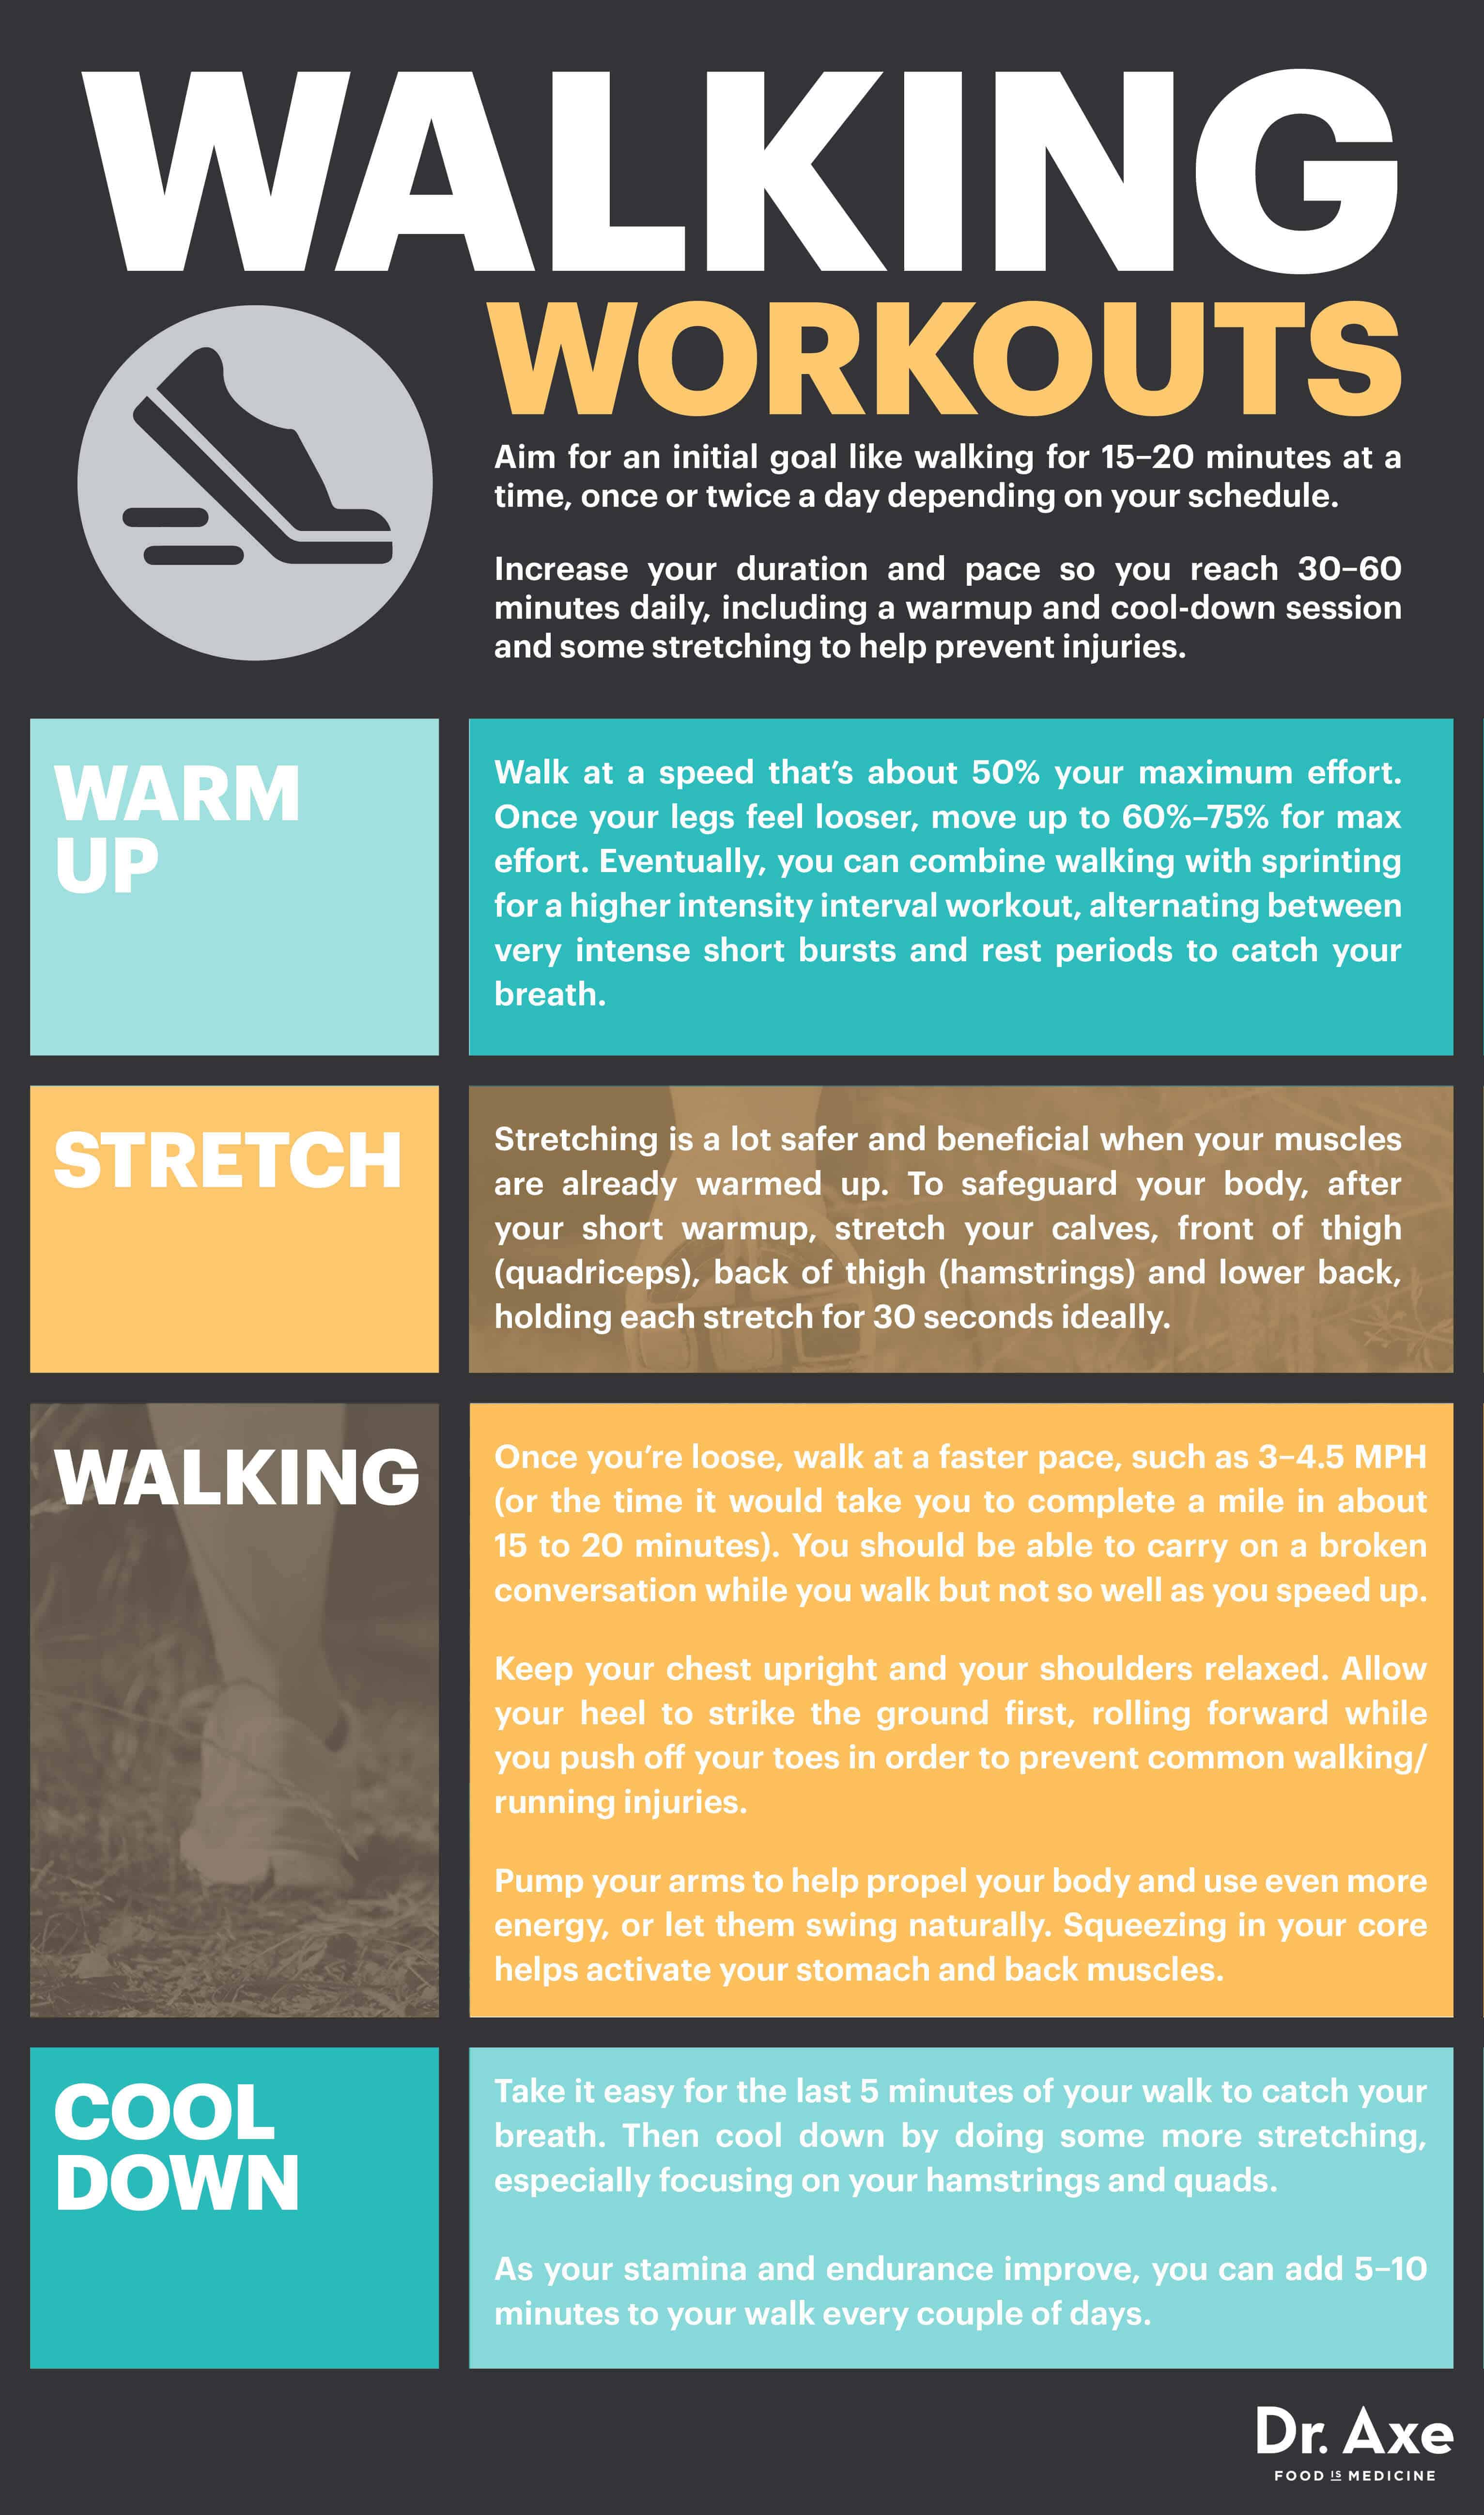 Walking workouts - Dr. Axe